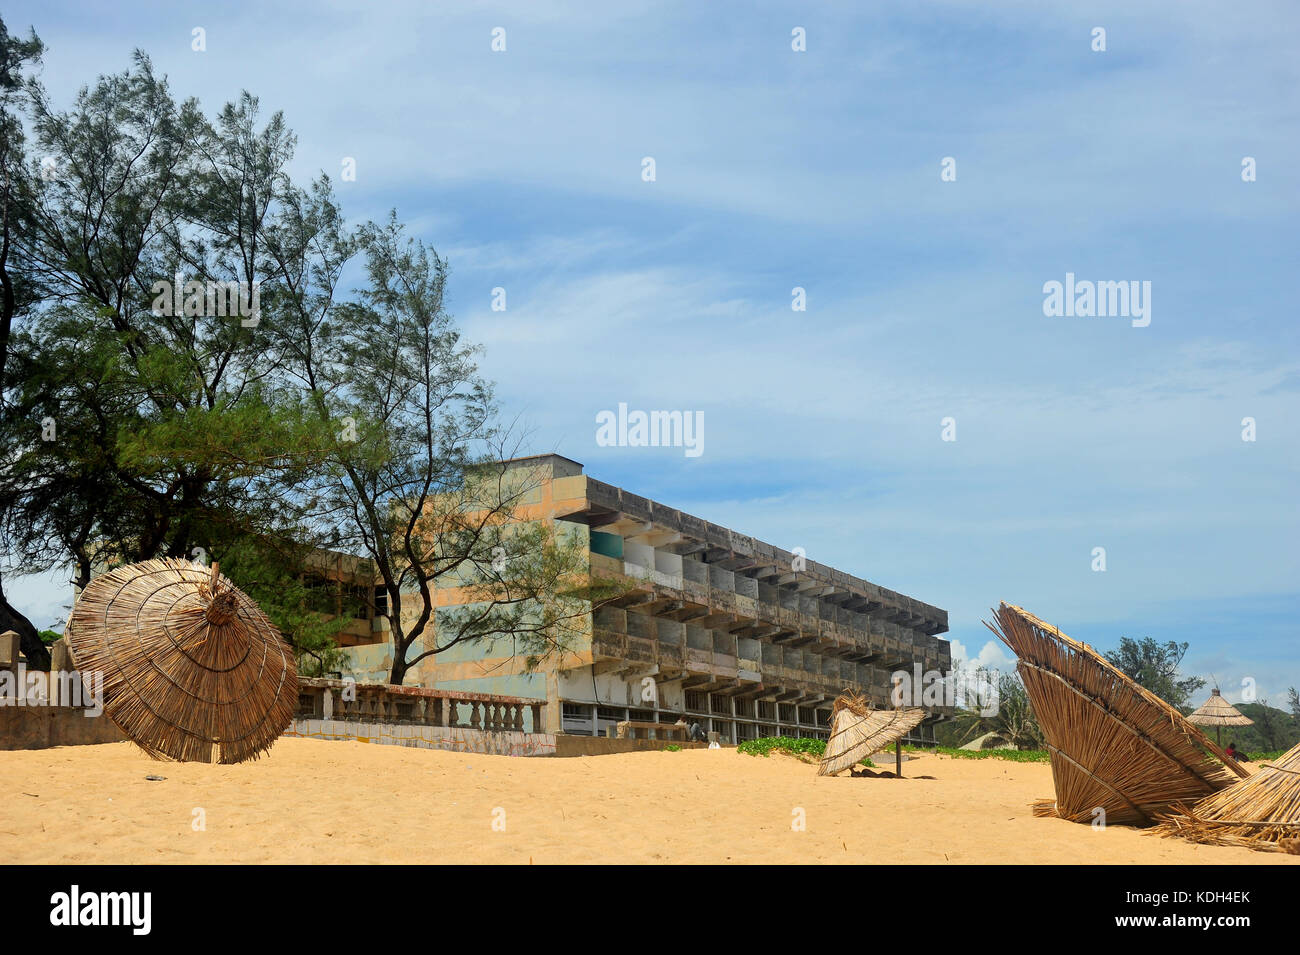 A block of flats overlooking the beach in Mozambique. Stock Photo